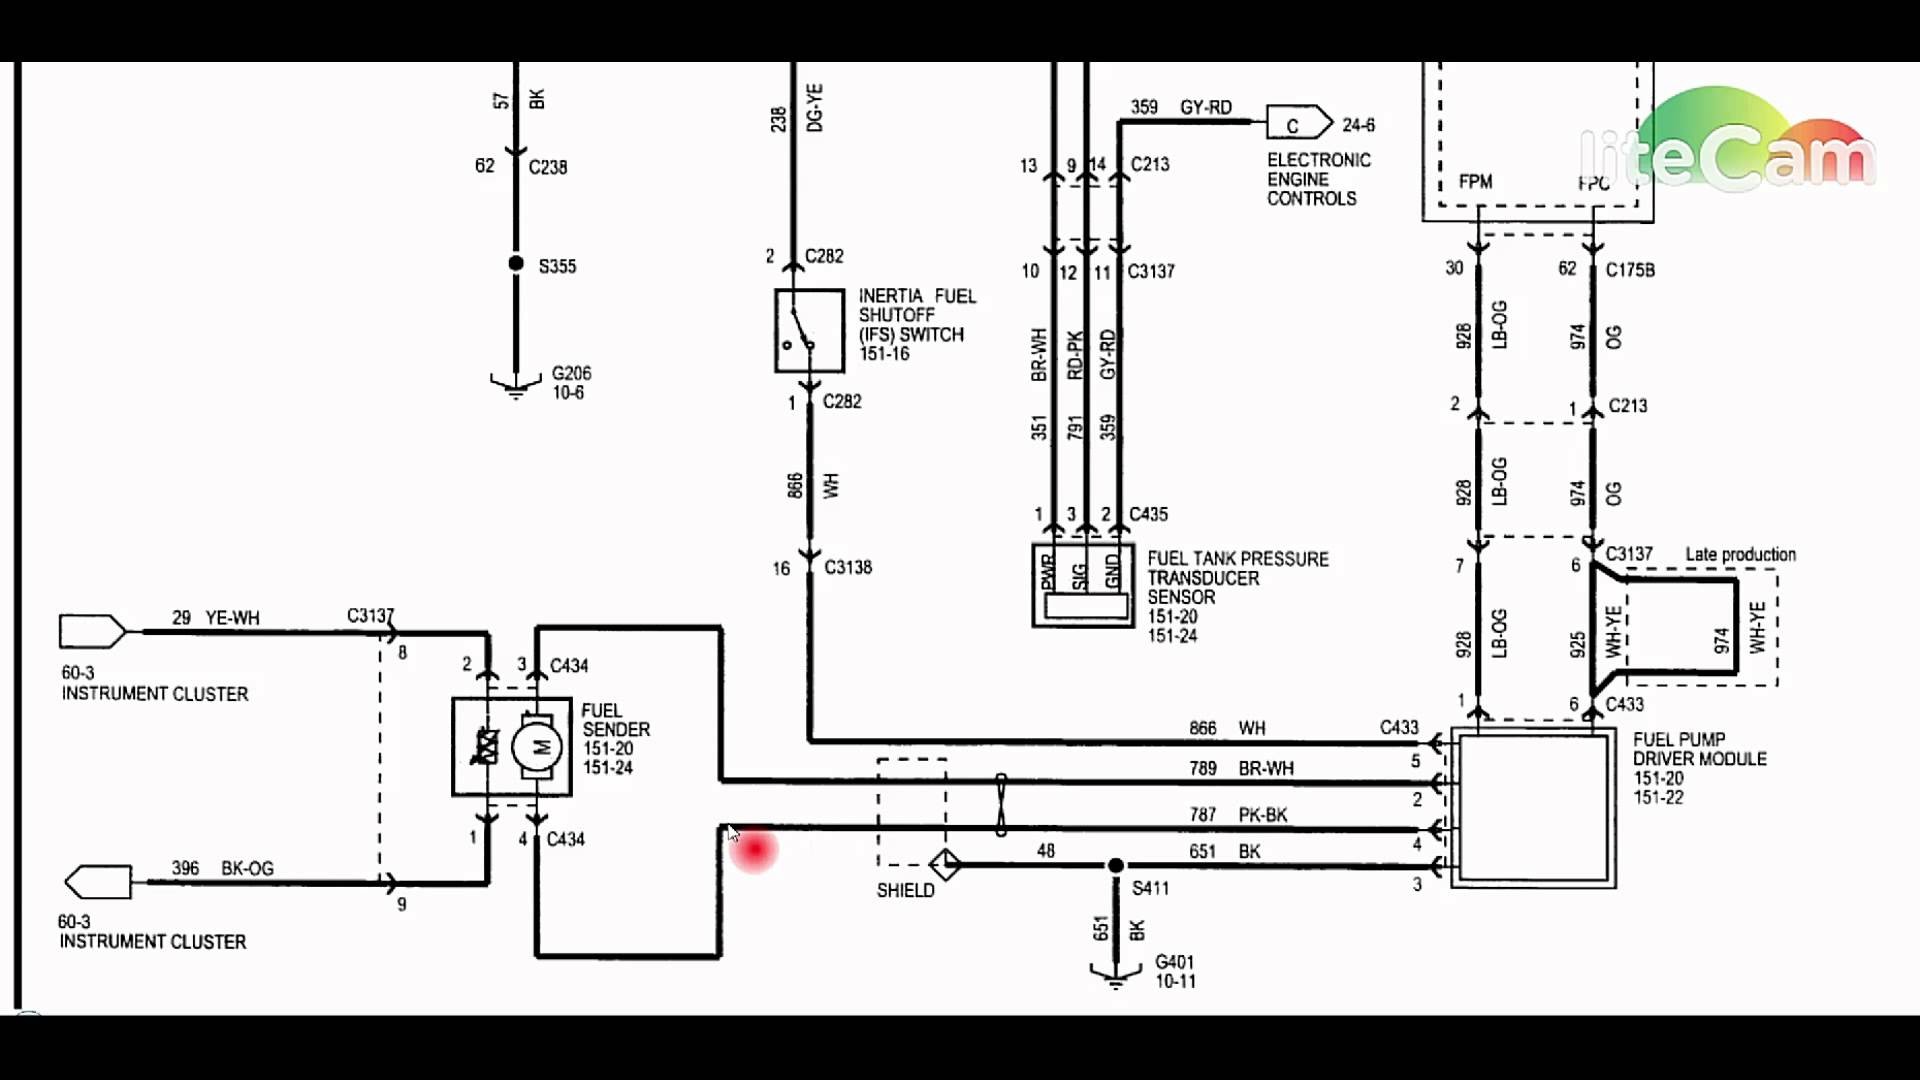 2013 ford F150 Wiring Diagram Panel Diagram 1997 ford 1988 ford F150 Fuel Pump Wiring Diagram More Of 2013 ford F150 Wiring Diagram